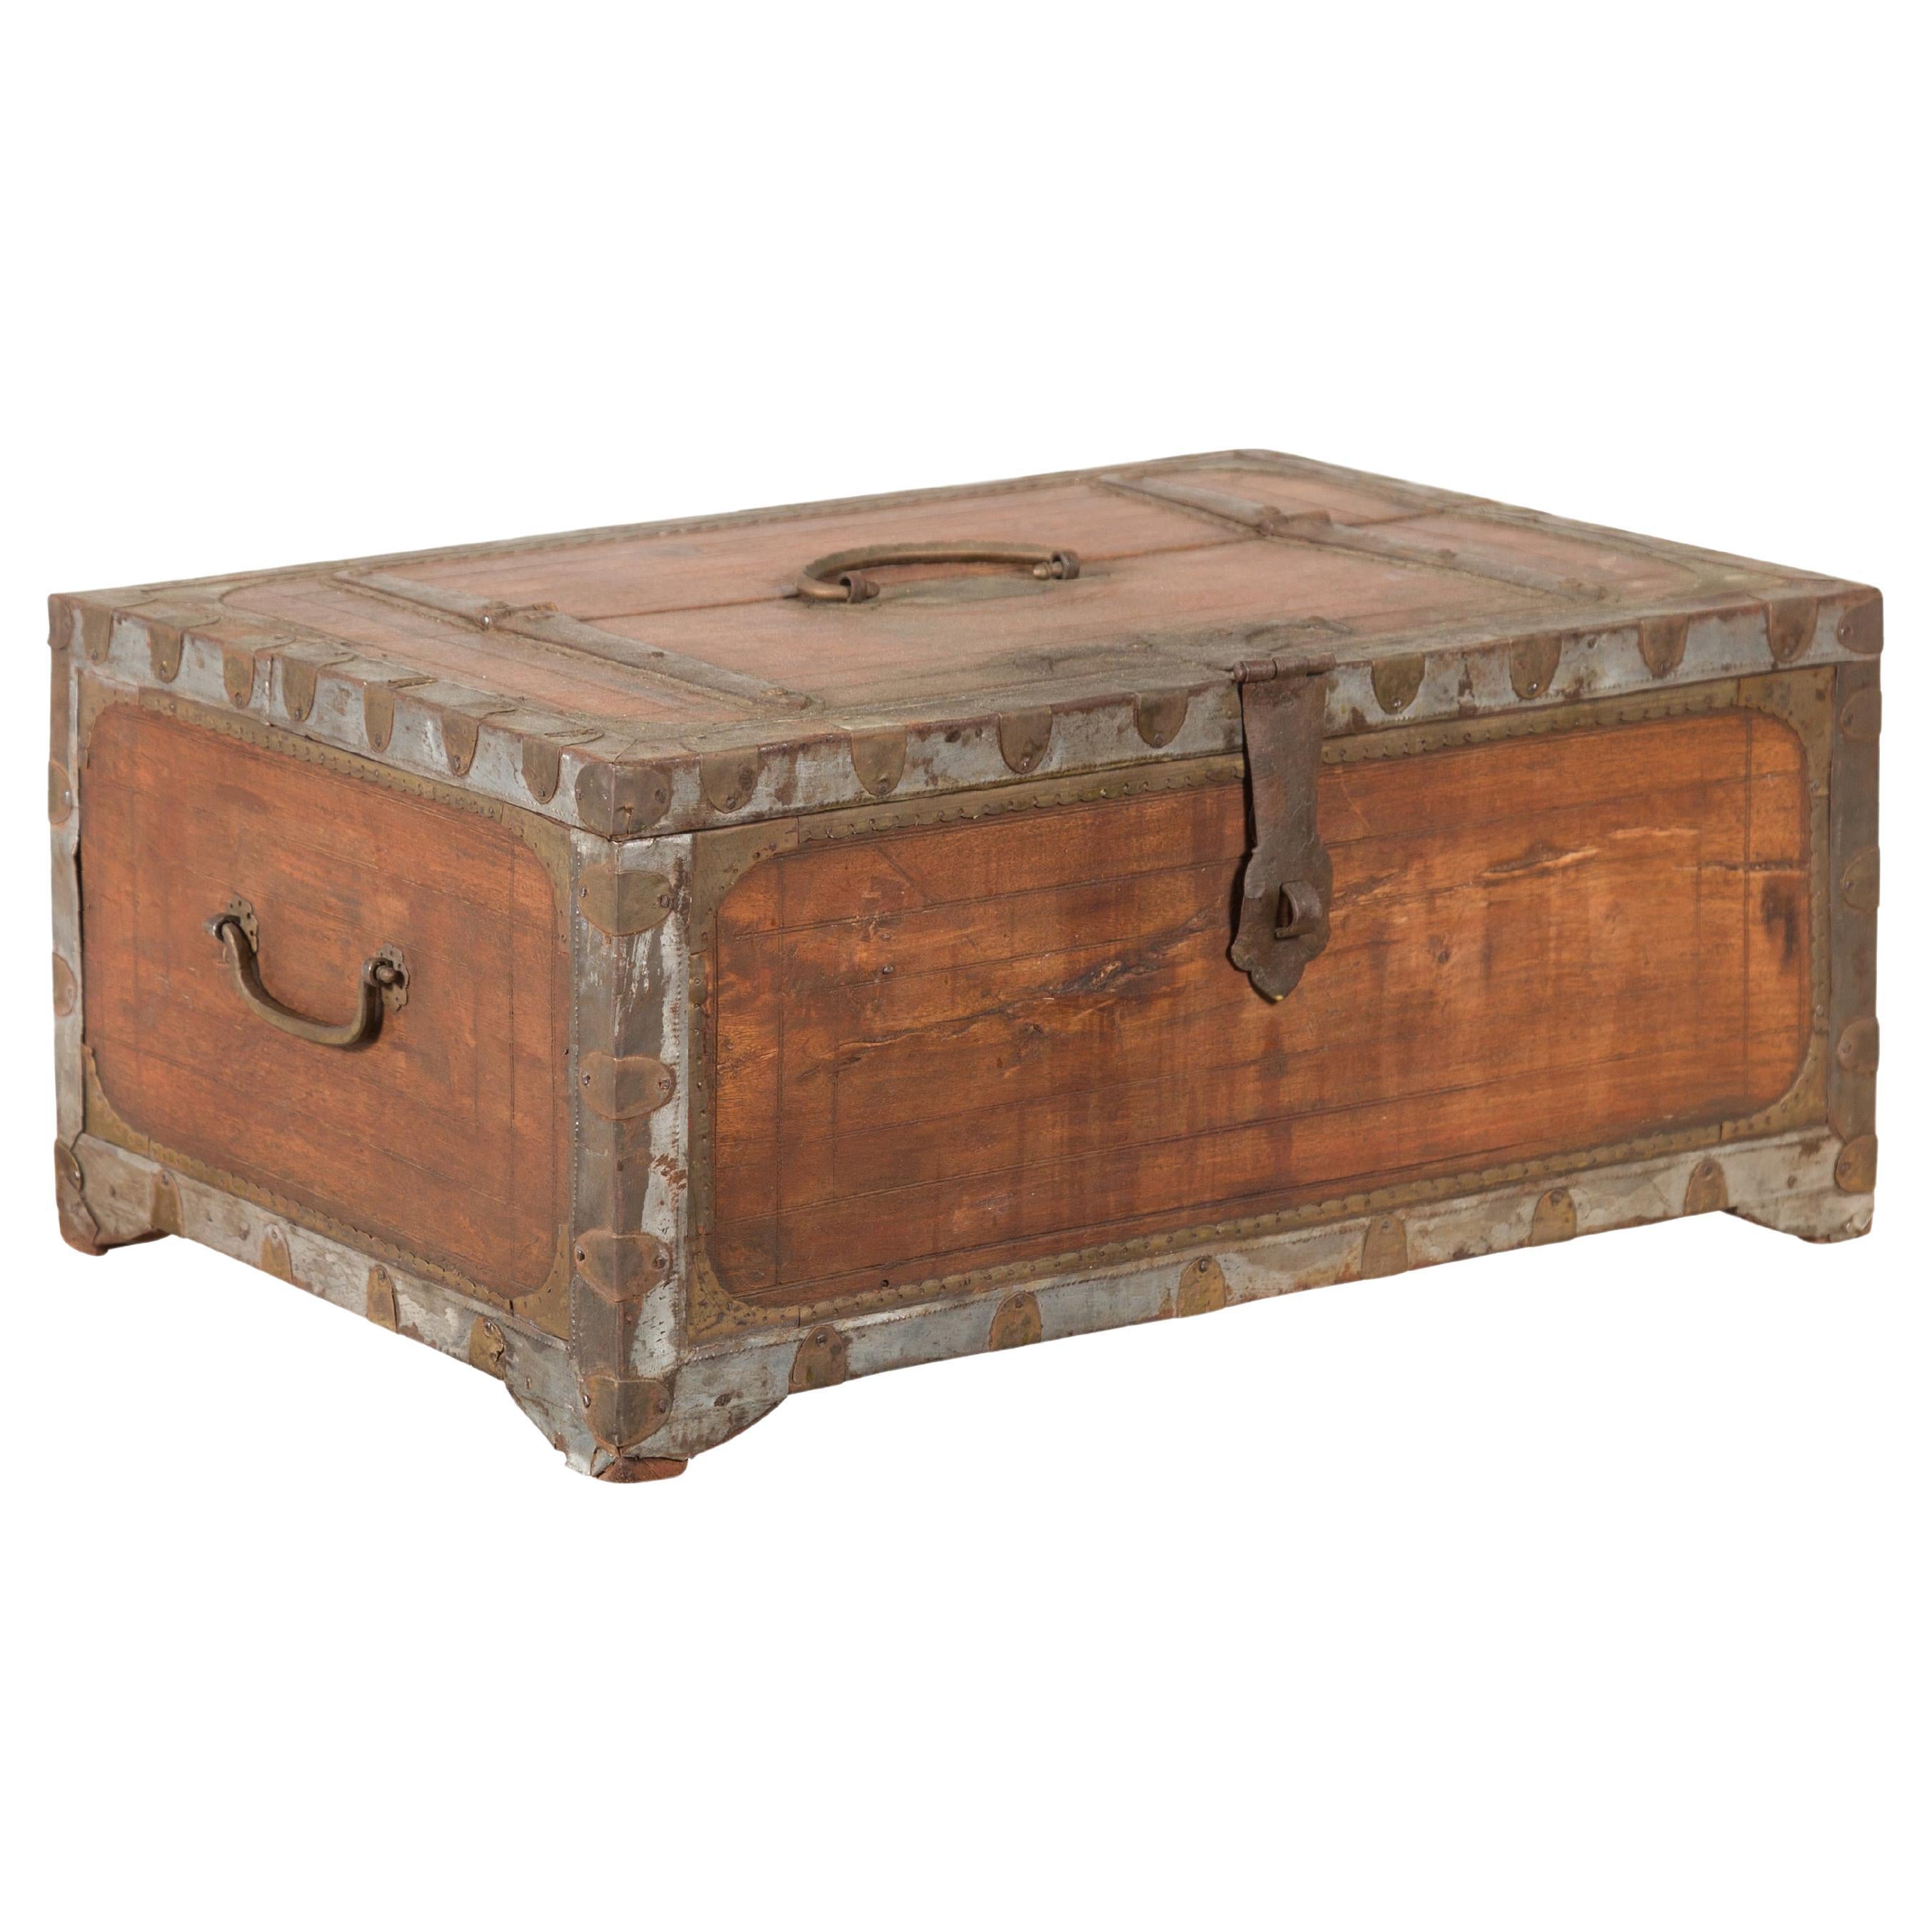 19th Century Indian Wooden Box with Brass Details and Distressed Patina For Sale